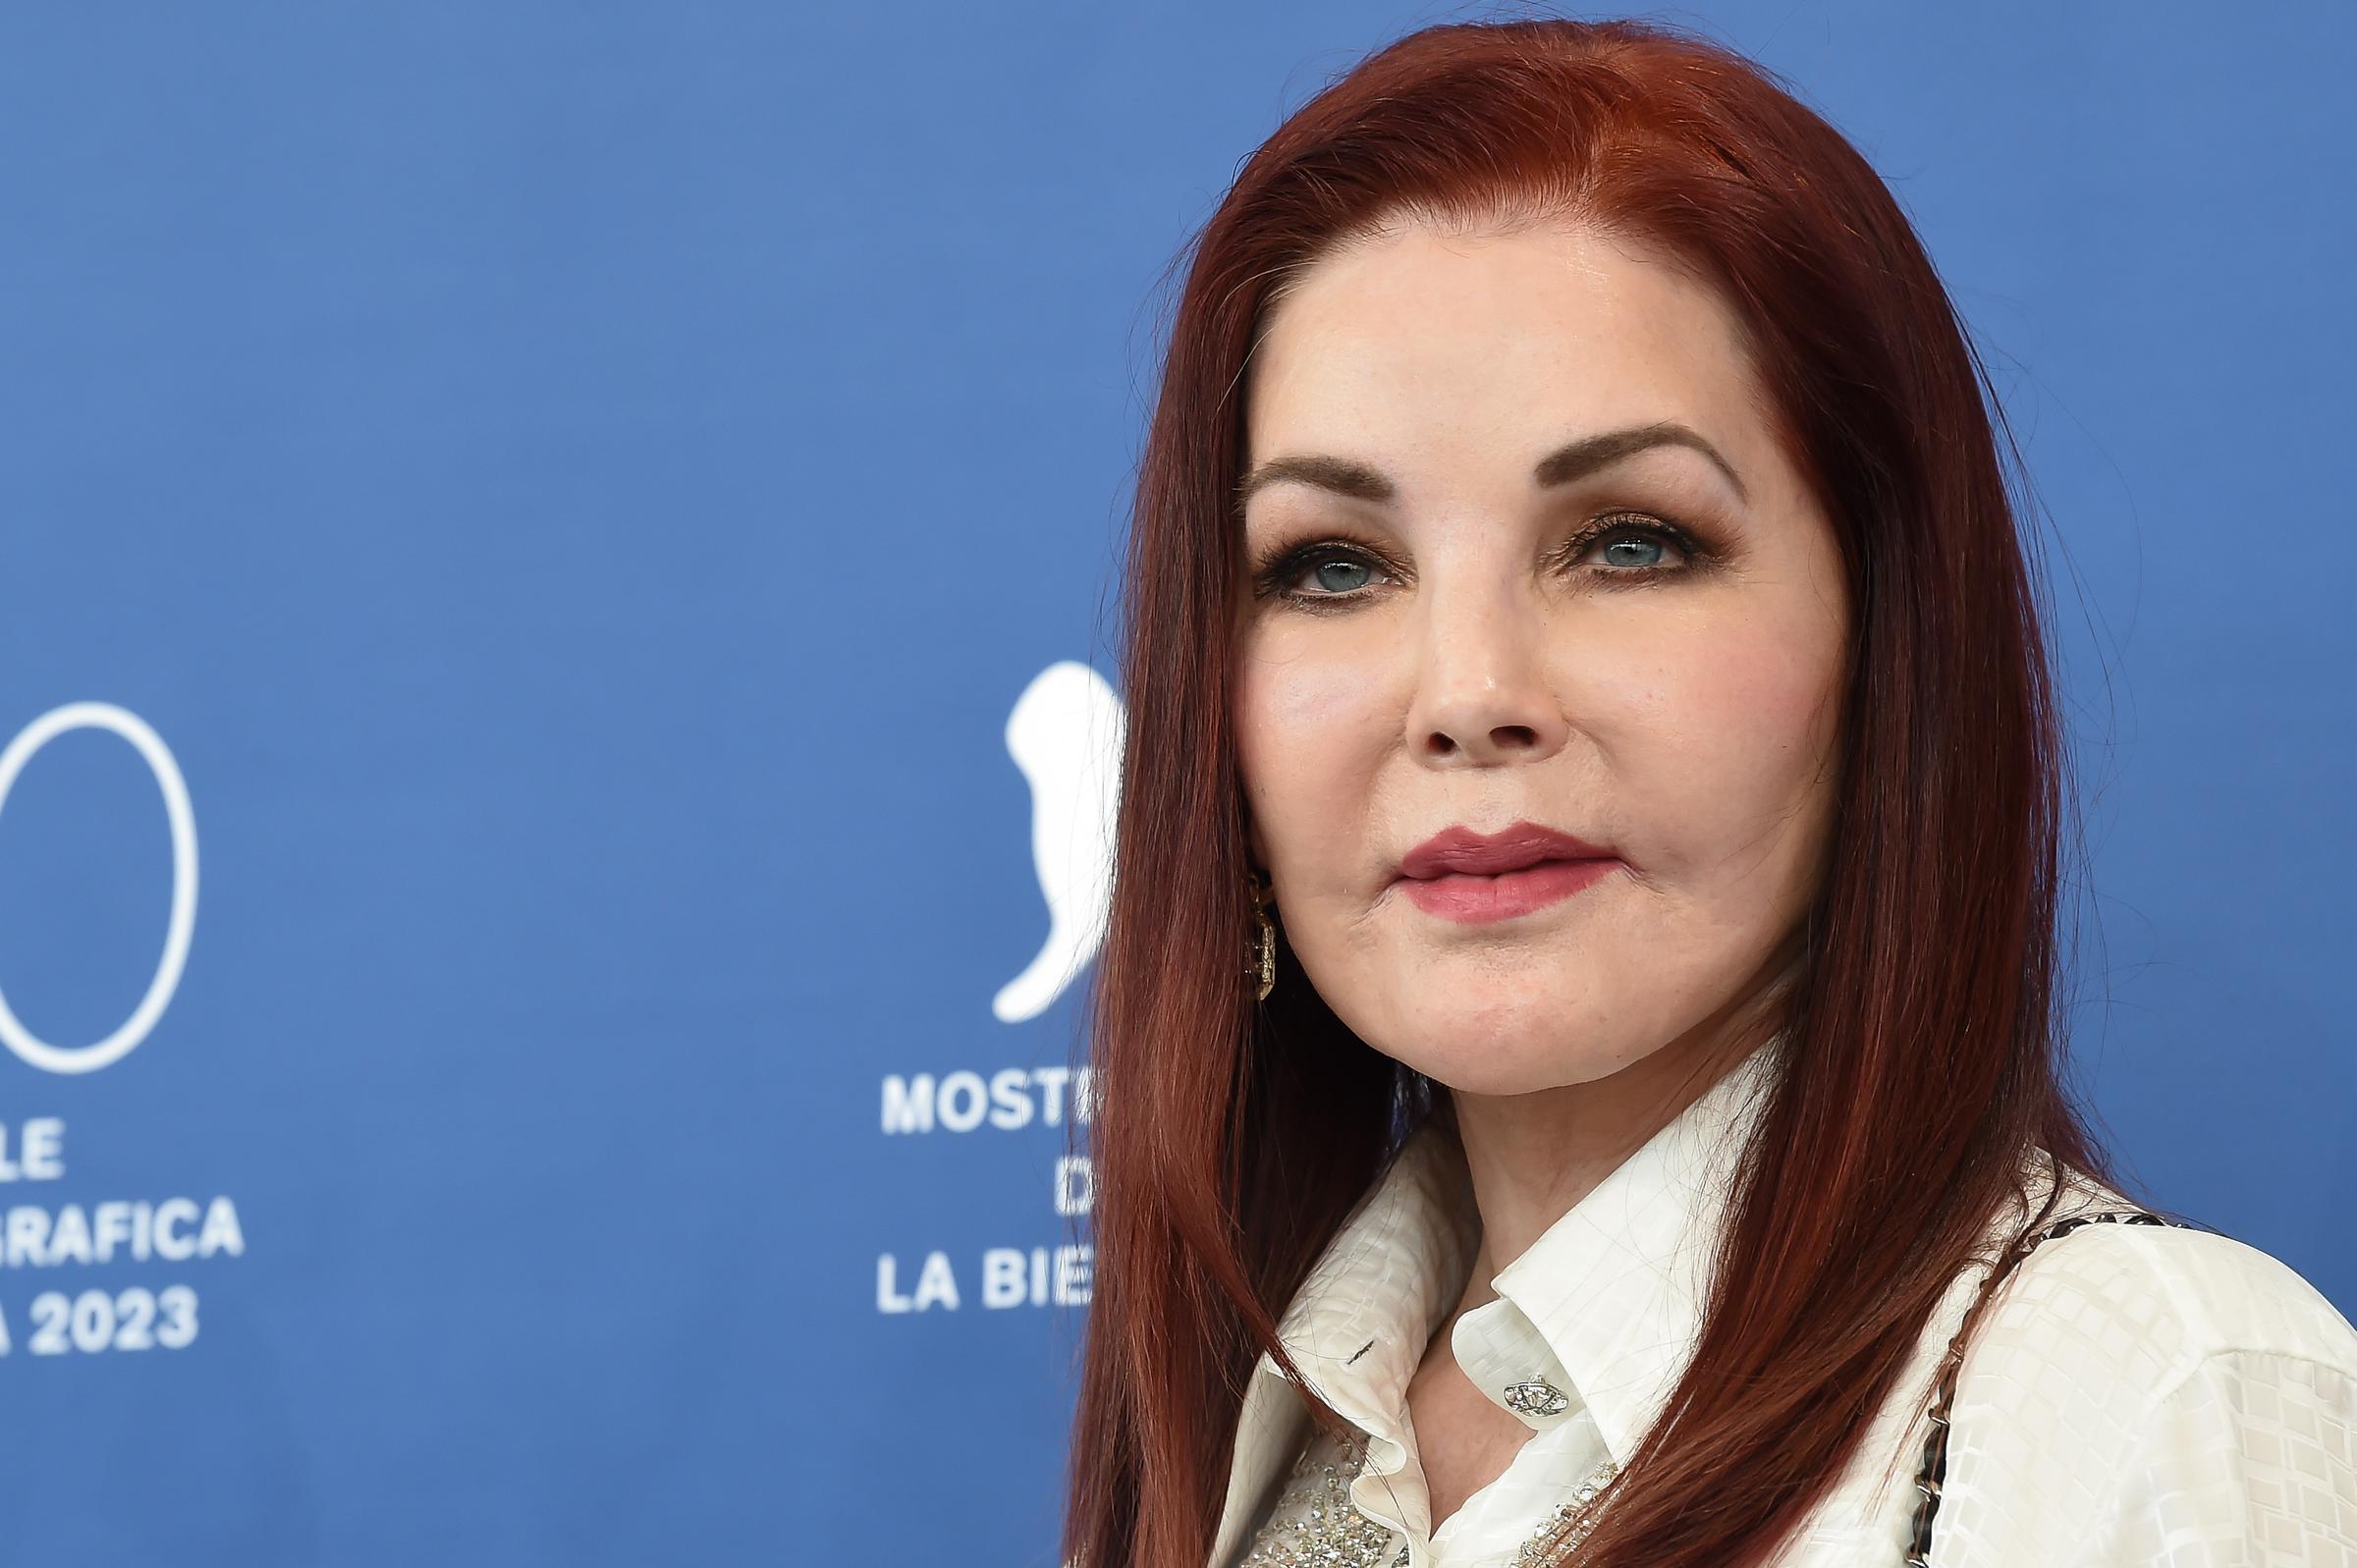 Priscilla Presley at the 80 Venice International Film Festival in Venice, Italy on September 4, 2023 | Source: Getty Images